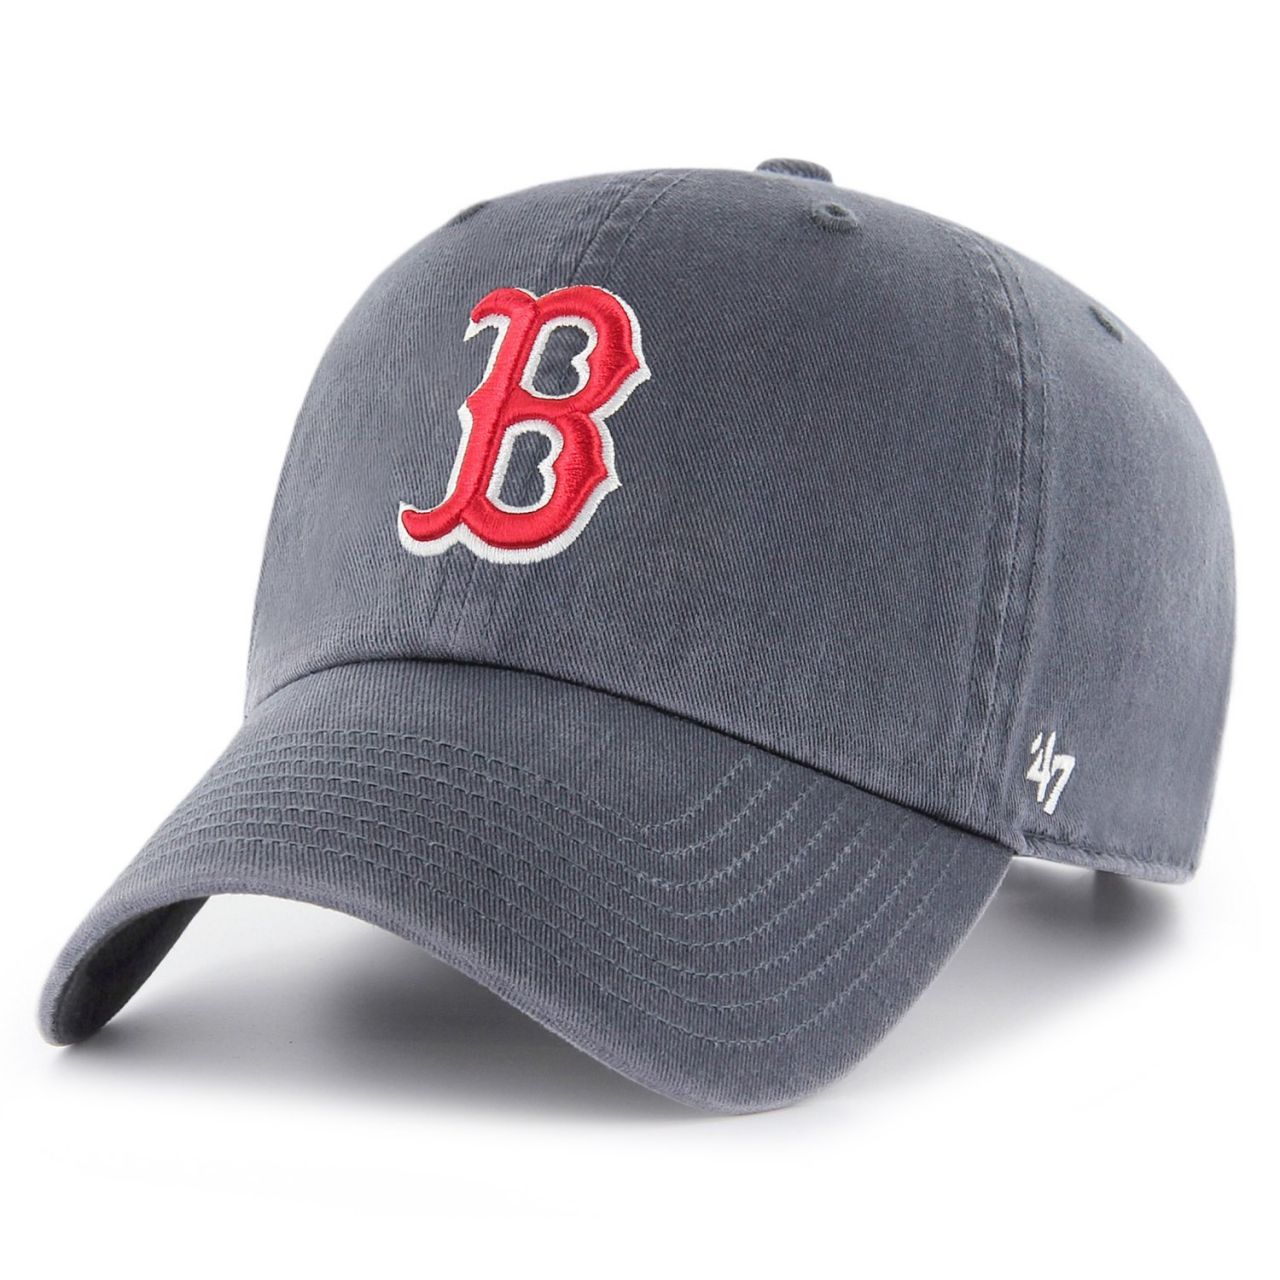 47 Brand Relaxed Fit Cap - CLEAN UP Boston Red Sox vintage von 47 Brand